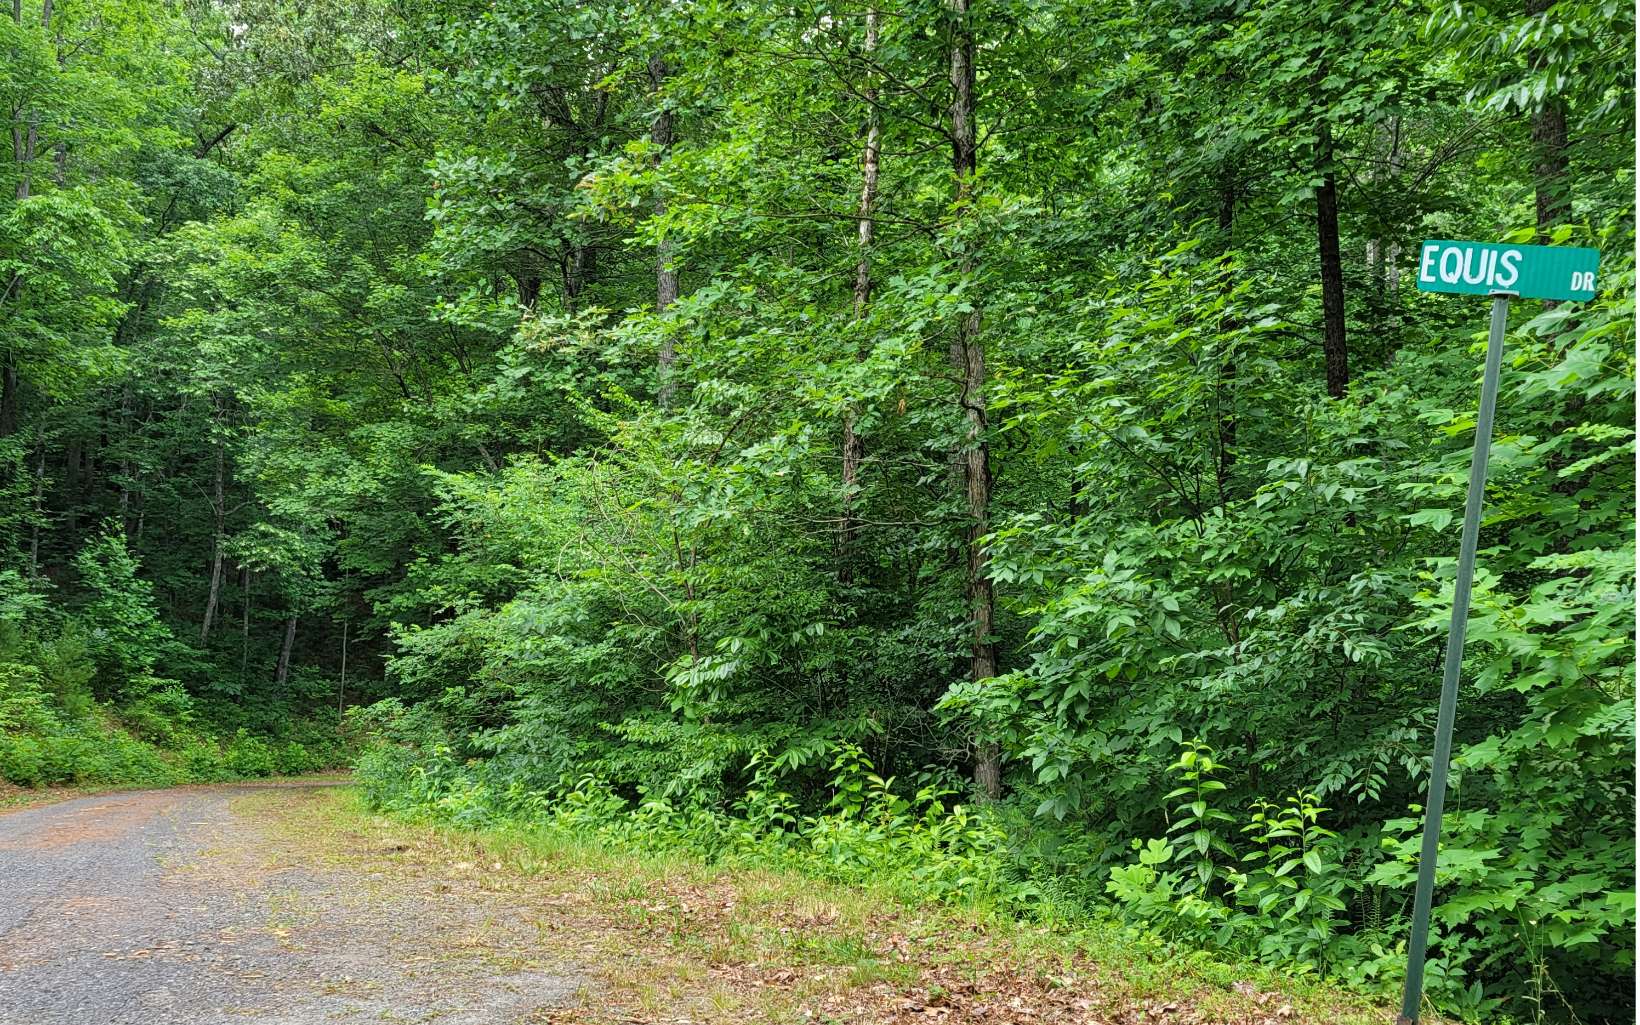 Private and tranquil GATED subdivision. Lot 2 is a Designated Equestrian Unit with at least 3 spring heads! The source of fresh spring mountain water is sure to attract deer and other wildlife to quench their thirst, too. Exceptionally priced 3.6 acre plat is nestled in the very desirable and popular North GA Mountains. The purpose of the restrictive covenants is to protect the value and attractiveness intended for residential or vacation homesites while also maintaining a private community w/ adequate lot sizes that offer a forest type setting with harmony and seclusion. The intent is to ensure the perpetual preservation of the natural beauty of this unique mountain community. Enjoy the convenience of paved roads, underground utilities, and county water. Must see! Priced to Sell!